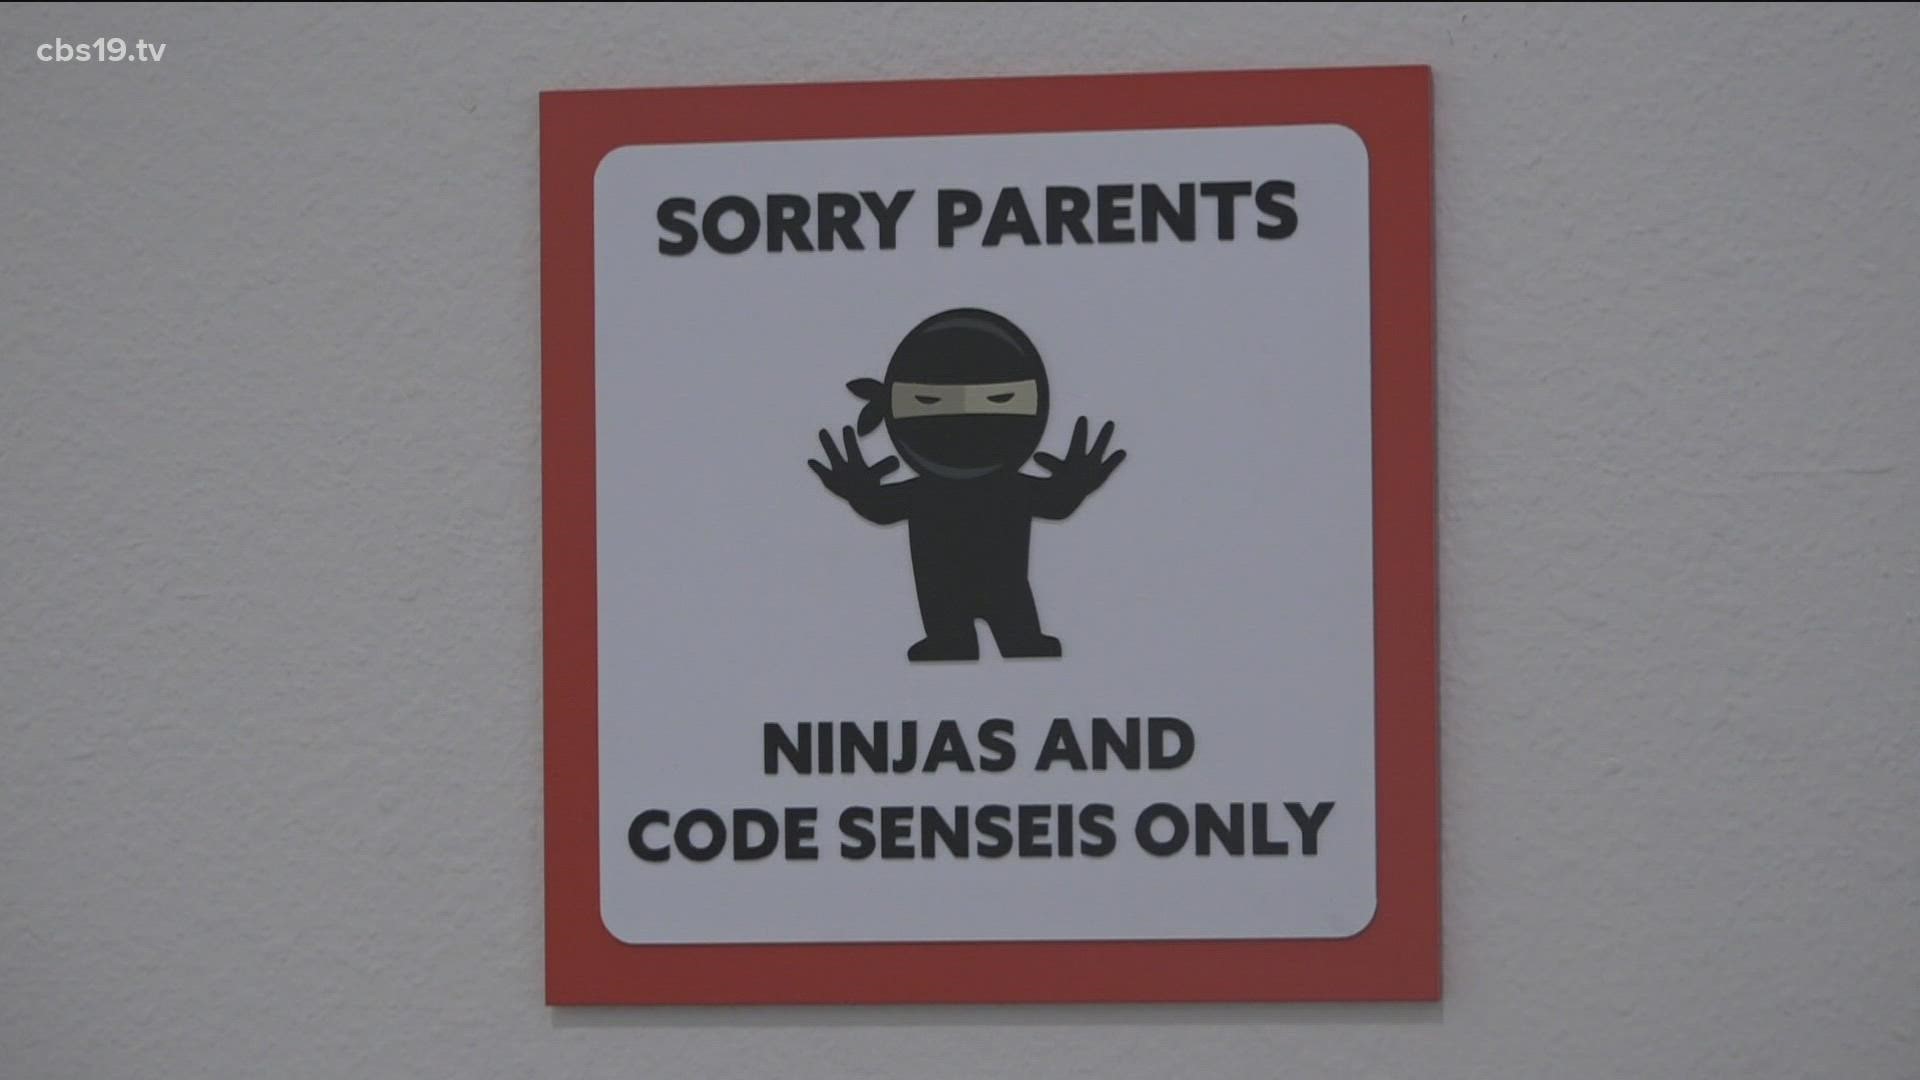 Code Ninjas allows kids to learn coding, gaming and robotics in a fun, safe environment